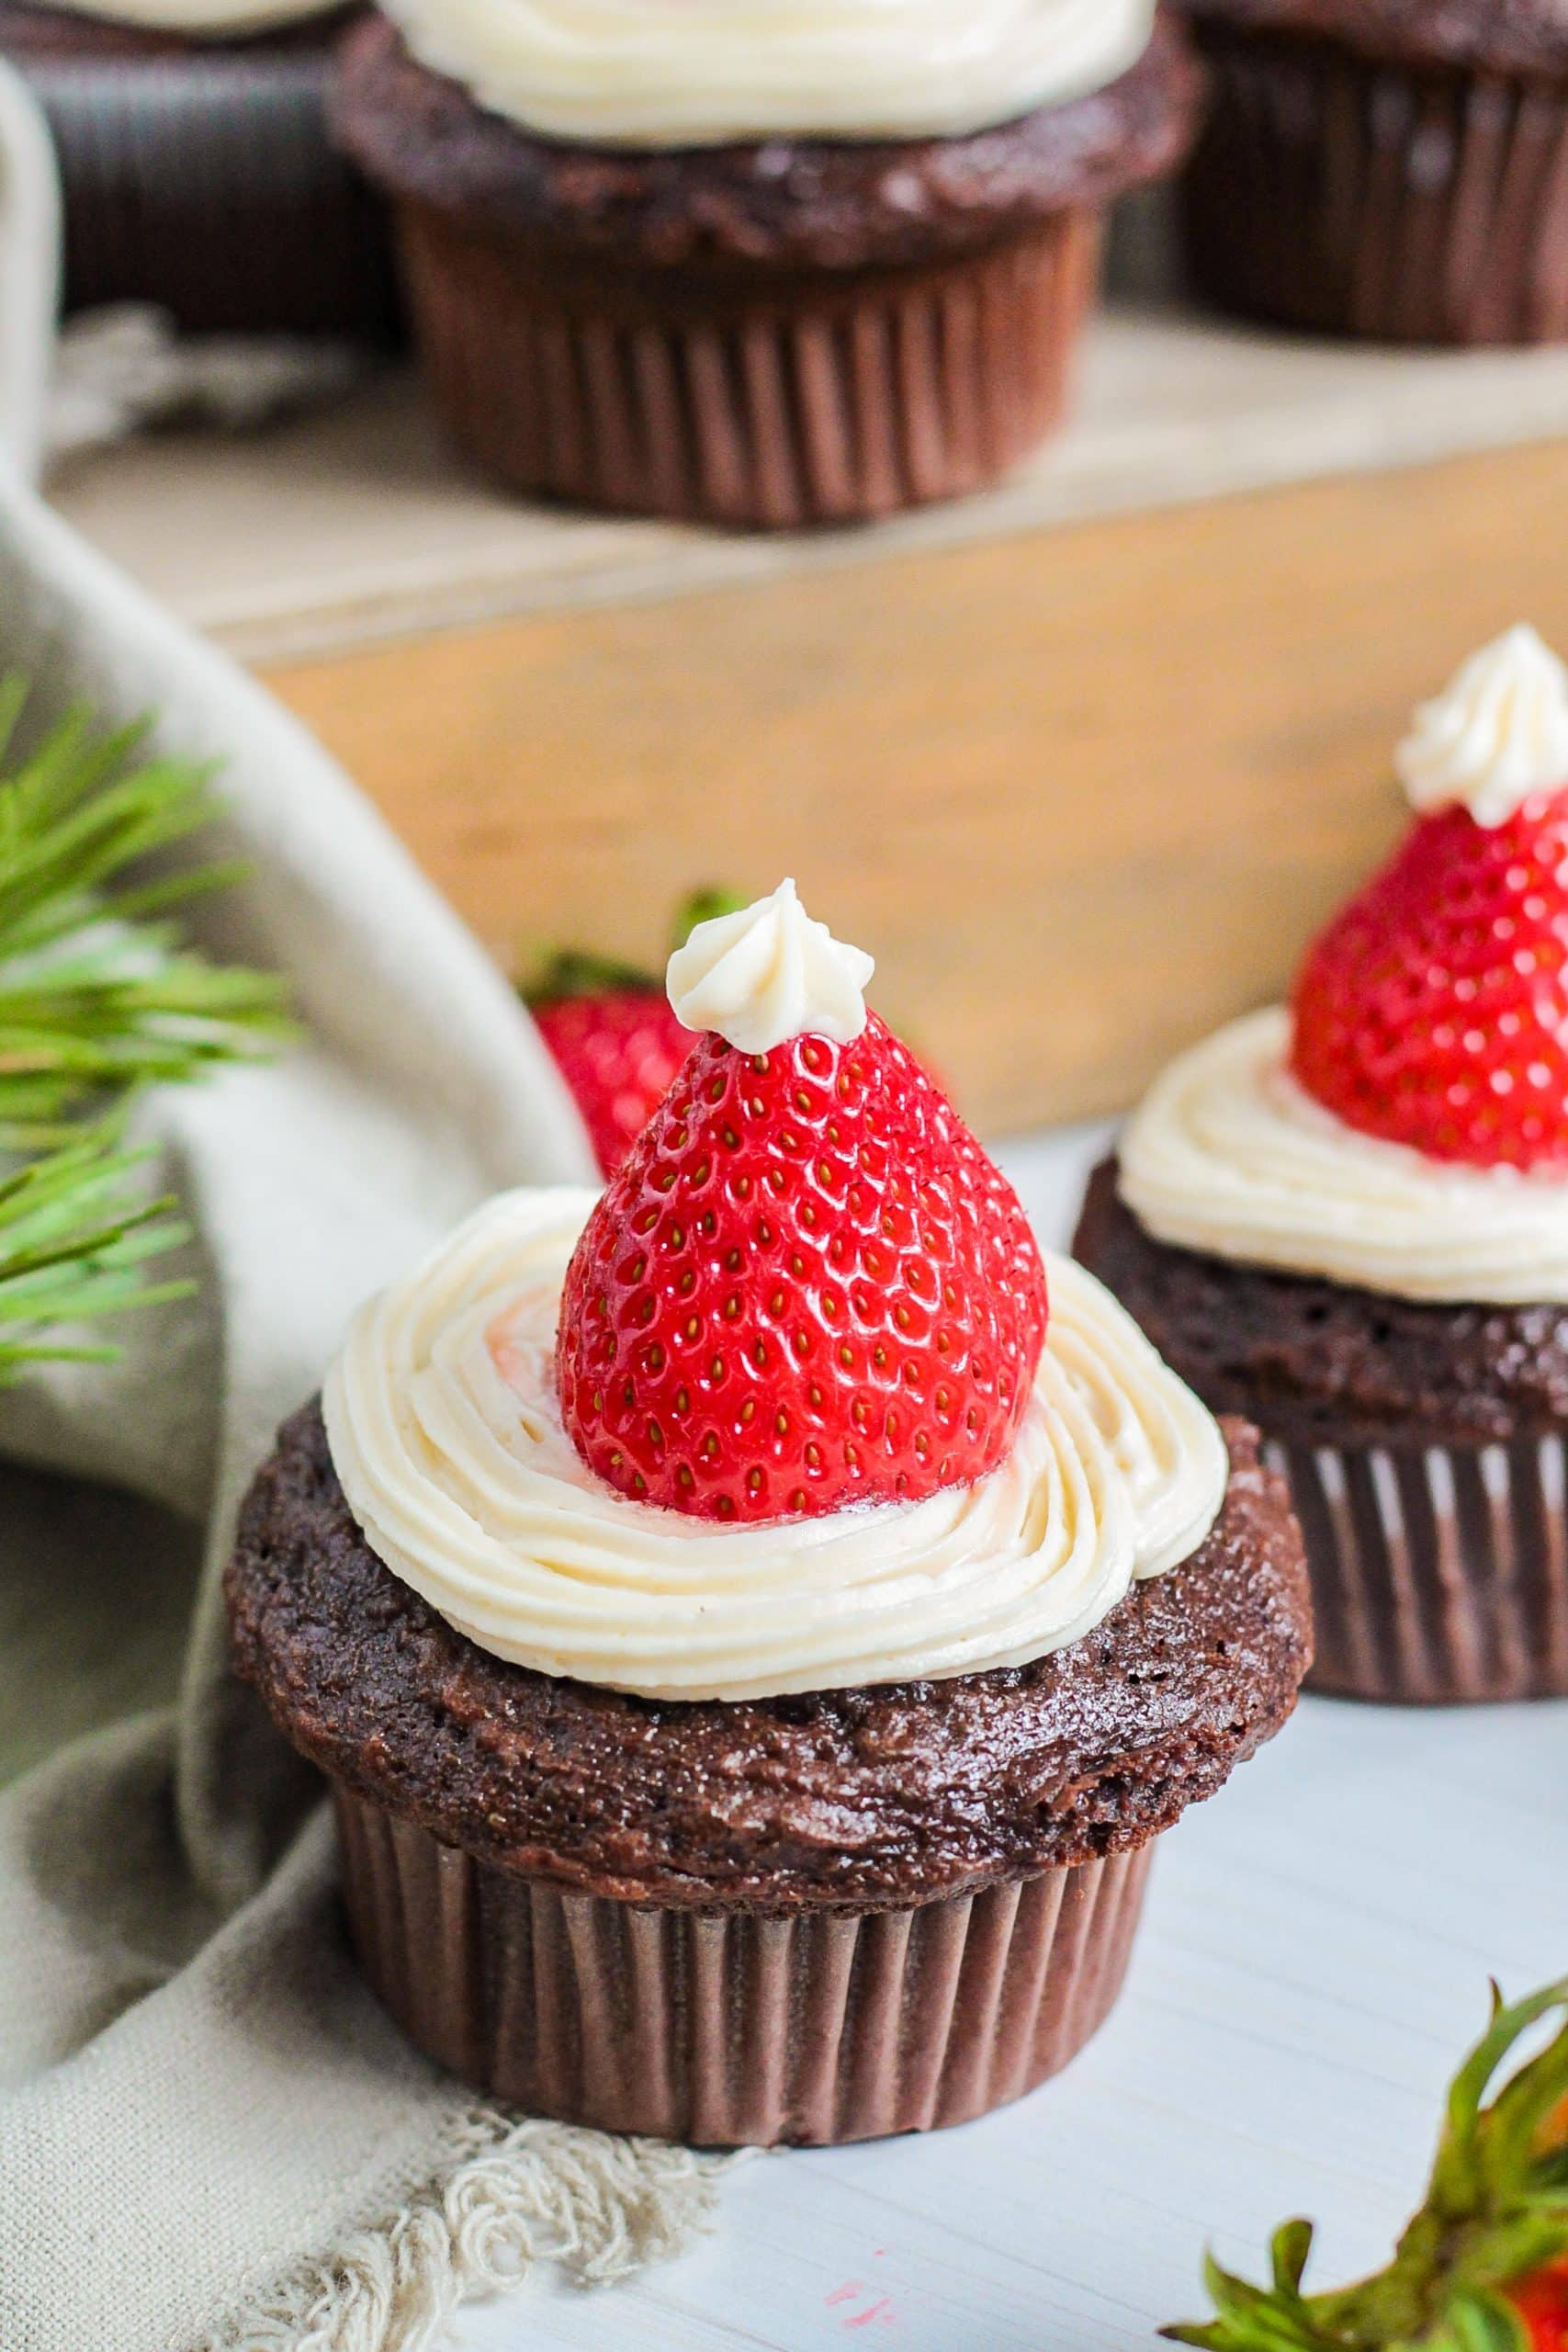 Chocolate cupcakes with strawberries on top.